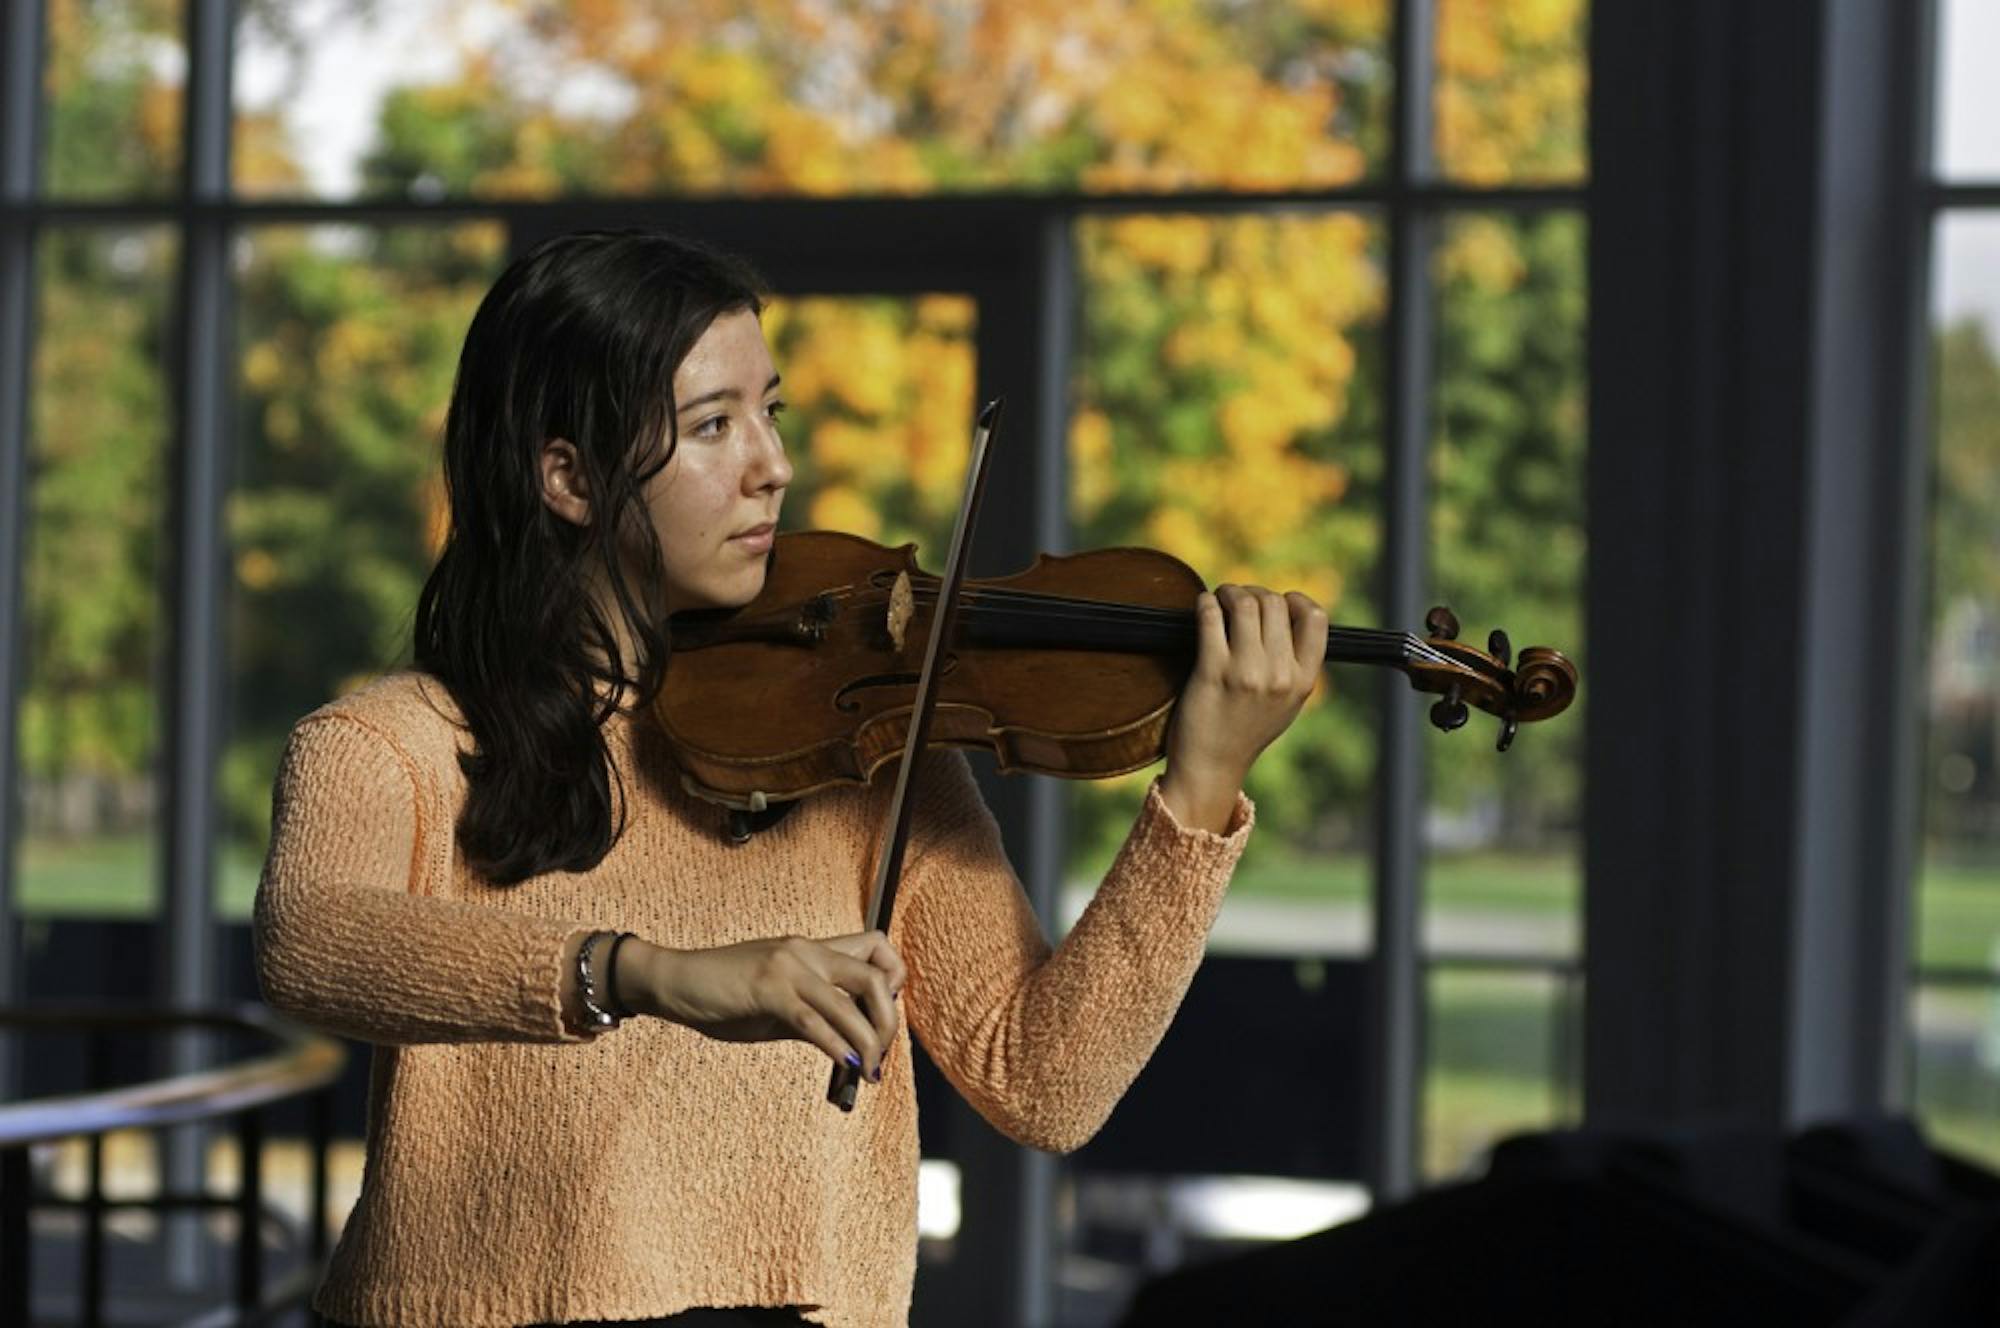 Erica Westenberg ’15, a violinist, is most passionate about chamber music.